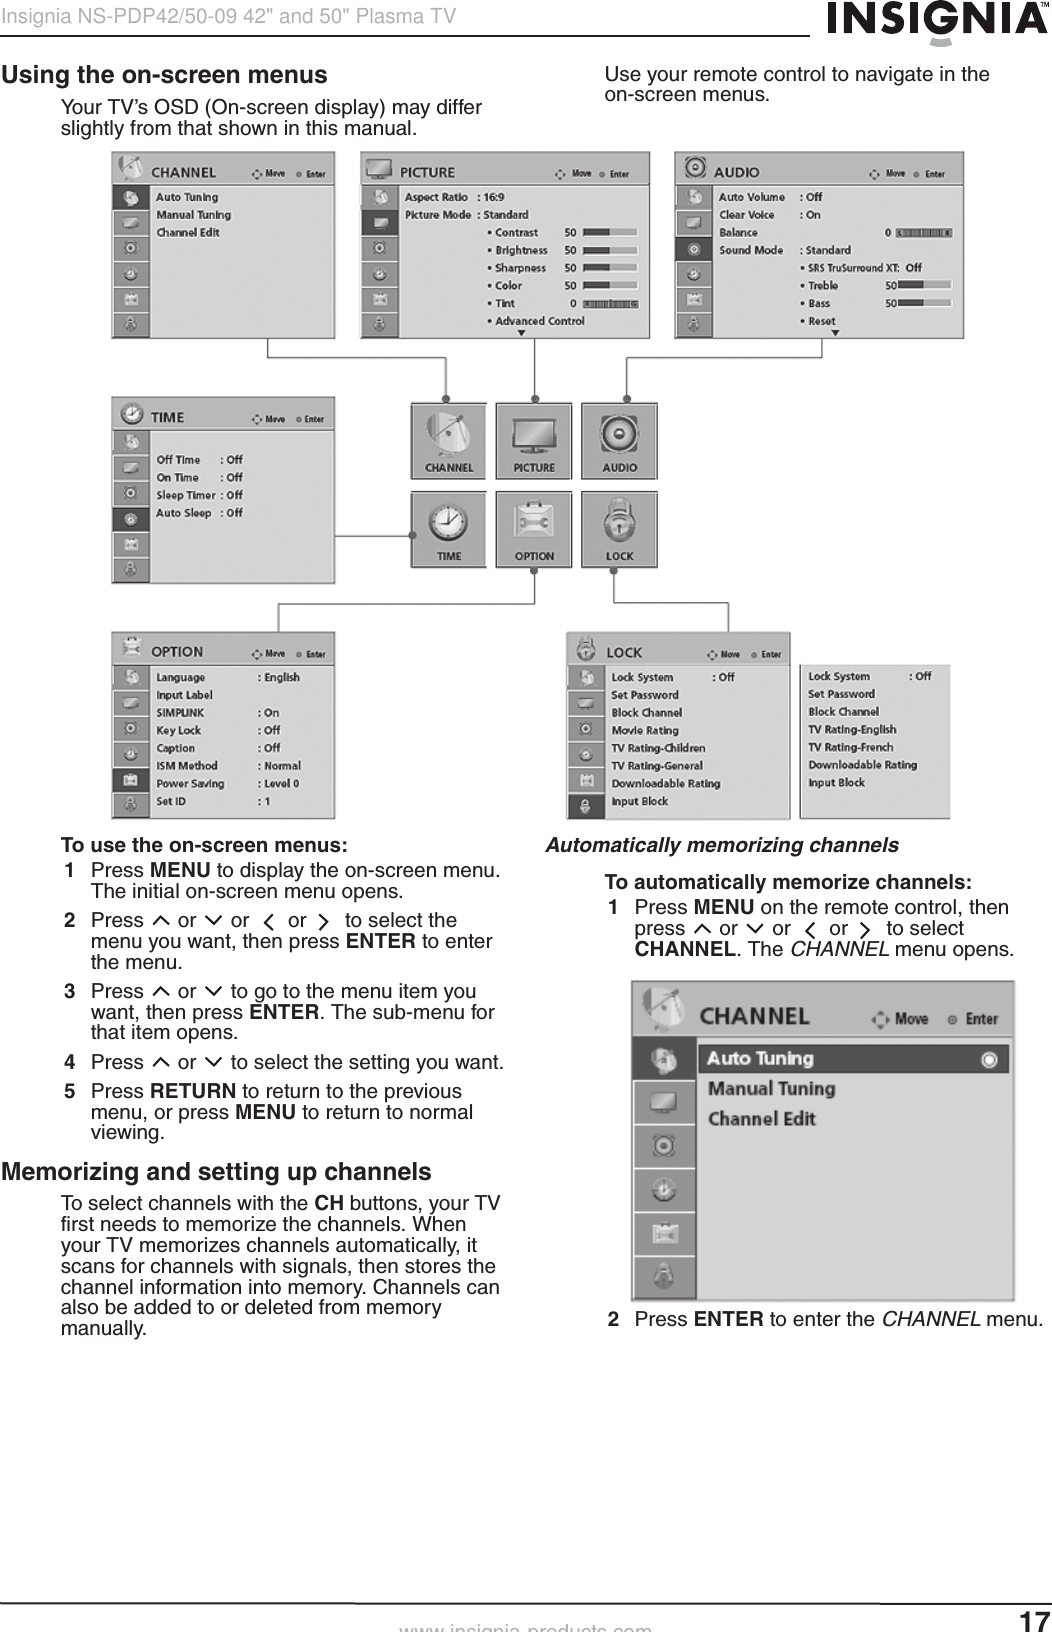 17Insignia NS-PDP42/50-09 42&quot; and 50&quot; Plasma TVwww.insignia-products.comUsing the on-screen menusYour TV’s OSD (On-screen display) may differ slightly from that shown in this manual.Use your remote control to navigate in the on-screen menus.To use the on-screen menus:1Press MENU to display the on-screen menu. The initial on-screen menu opens.2Press  or   or   or   to select the menu you want, then press ENTER to enter the menu.3Press  or   to go to the menu item you want, then press ENTER. The sub-menu for that item opens.4Press  or   to select the setting you want.5Press RETURN to return to the previous menu, or press MENU to return to normal viewing.Memorizing and setting up channelsTo select channels with the CH buttons, your TV first needs to memorize the channels. When your TV memorizes channels automatically, it scans for channels with signals, then stores the channel information into memory. Channels can also be added to or deleted from memory manually.Automatically memorizing channelsTo automatically memorize channels:1Press MENU on the remote control, then press  or   or   or   to select CHANNEL. The CHANNEL menu opens.2Press ENTER to enter the CHANNELmenu.